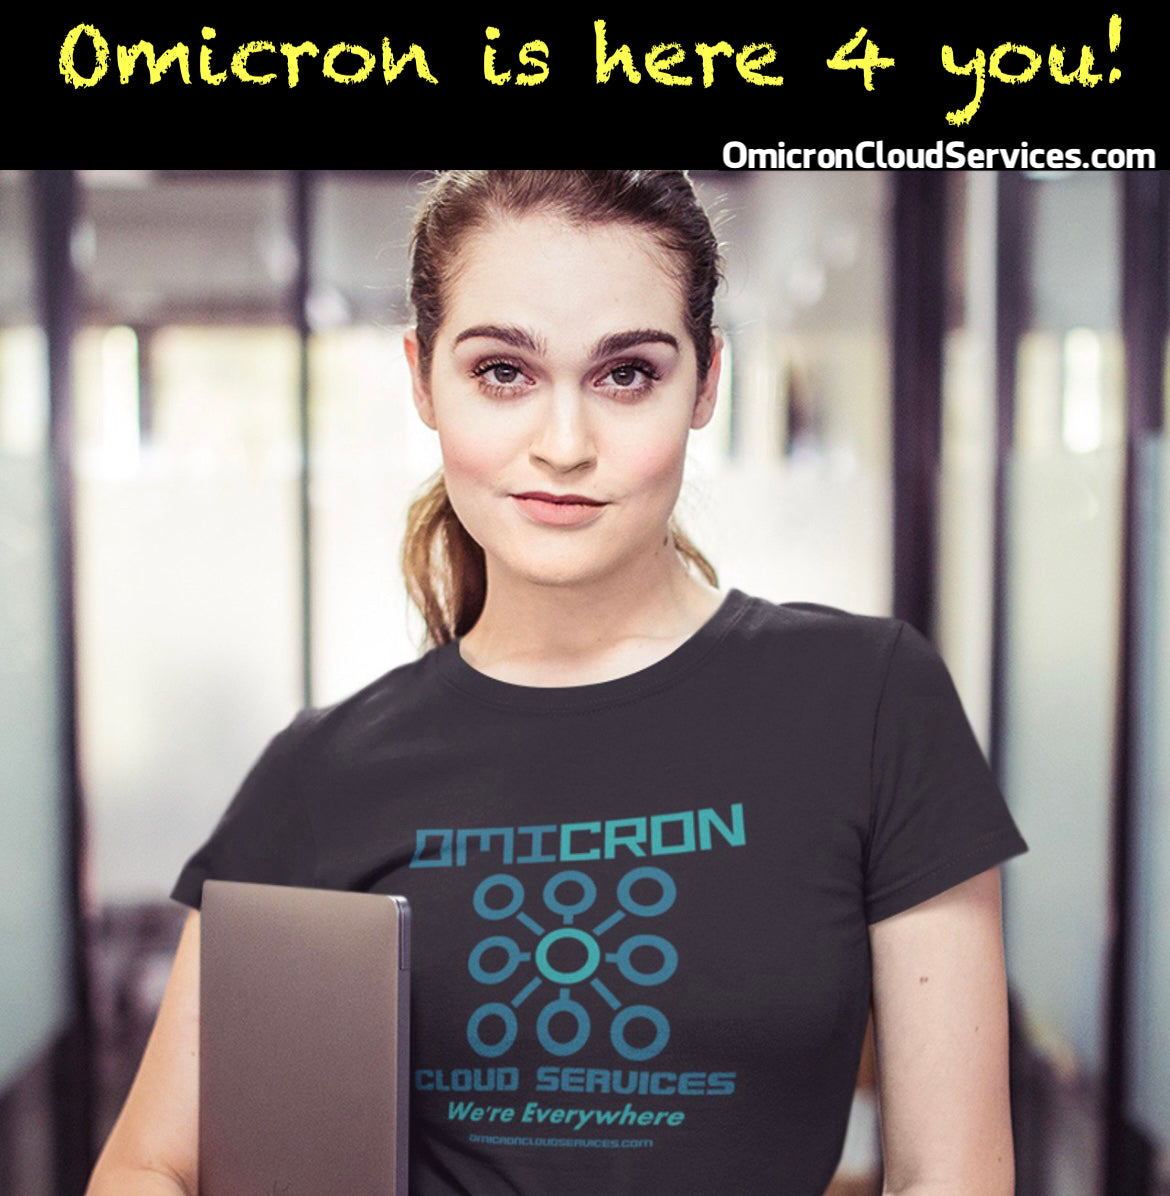 Omicron is here 4 you!